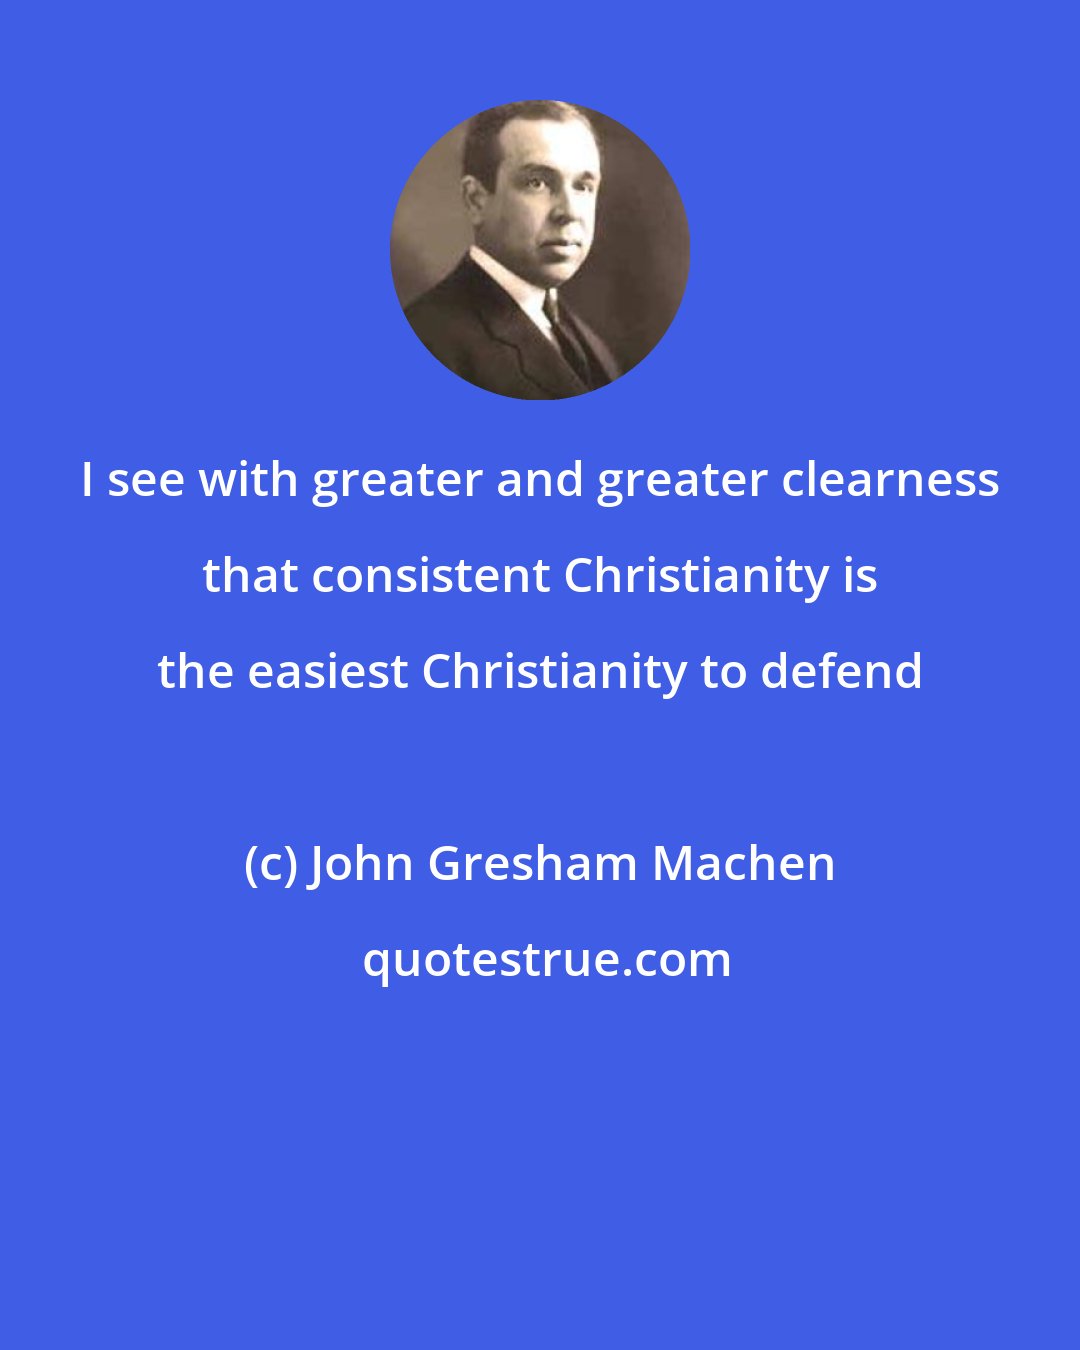 John Gresham Machen: I see with greater and greater clearness that consistent Christianity is the easiest Christianity to defend